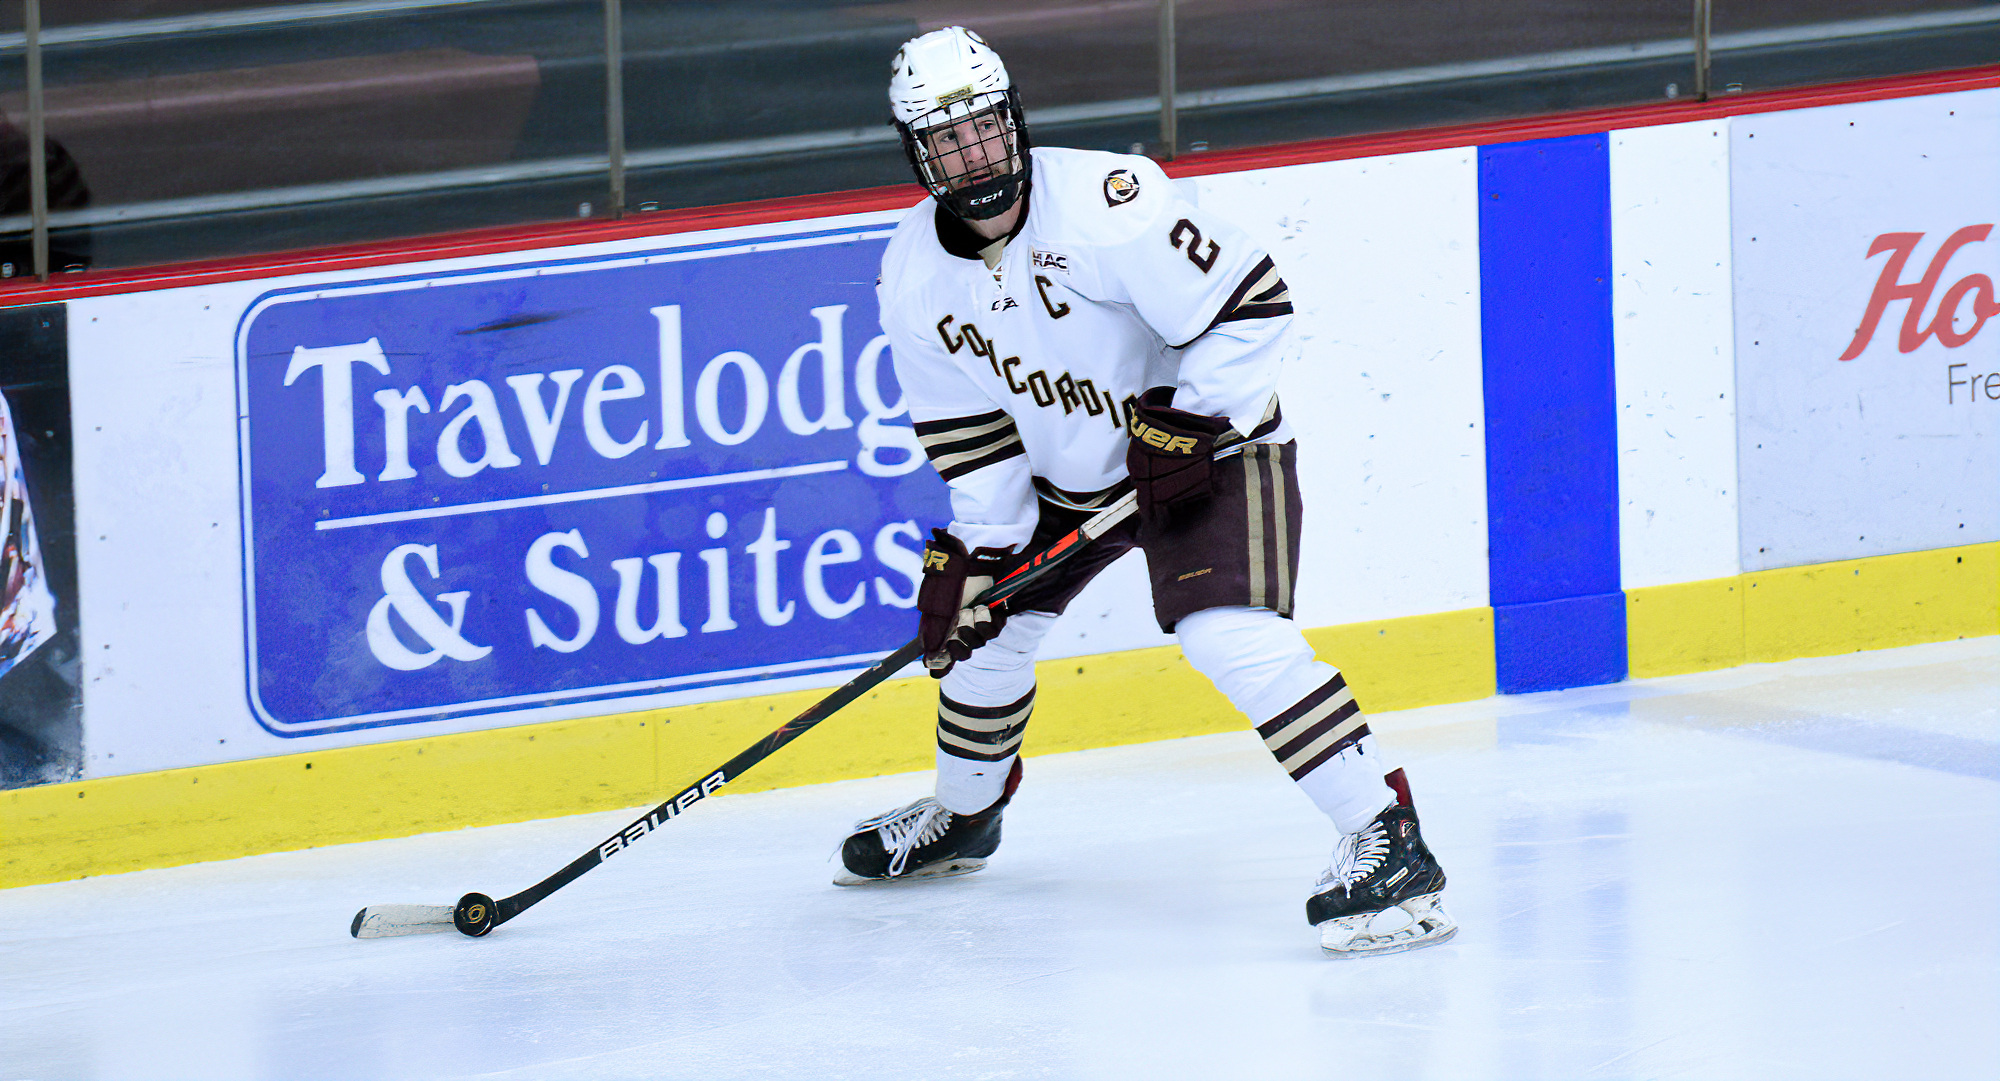 Senior captain Alex Stoley led the Cobbers with three assists in the team's 7-1 win at Gustavus.